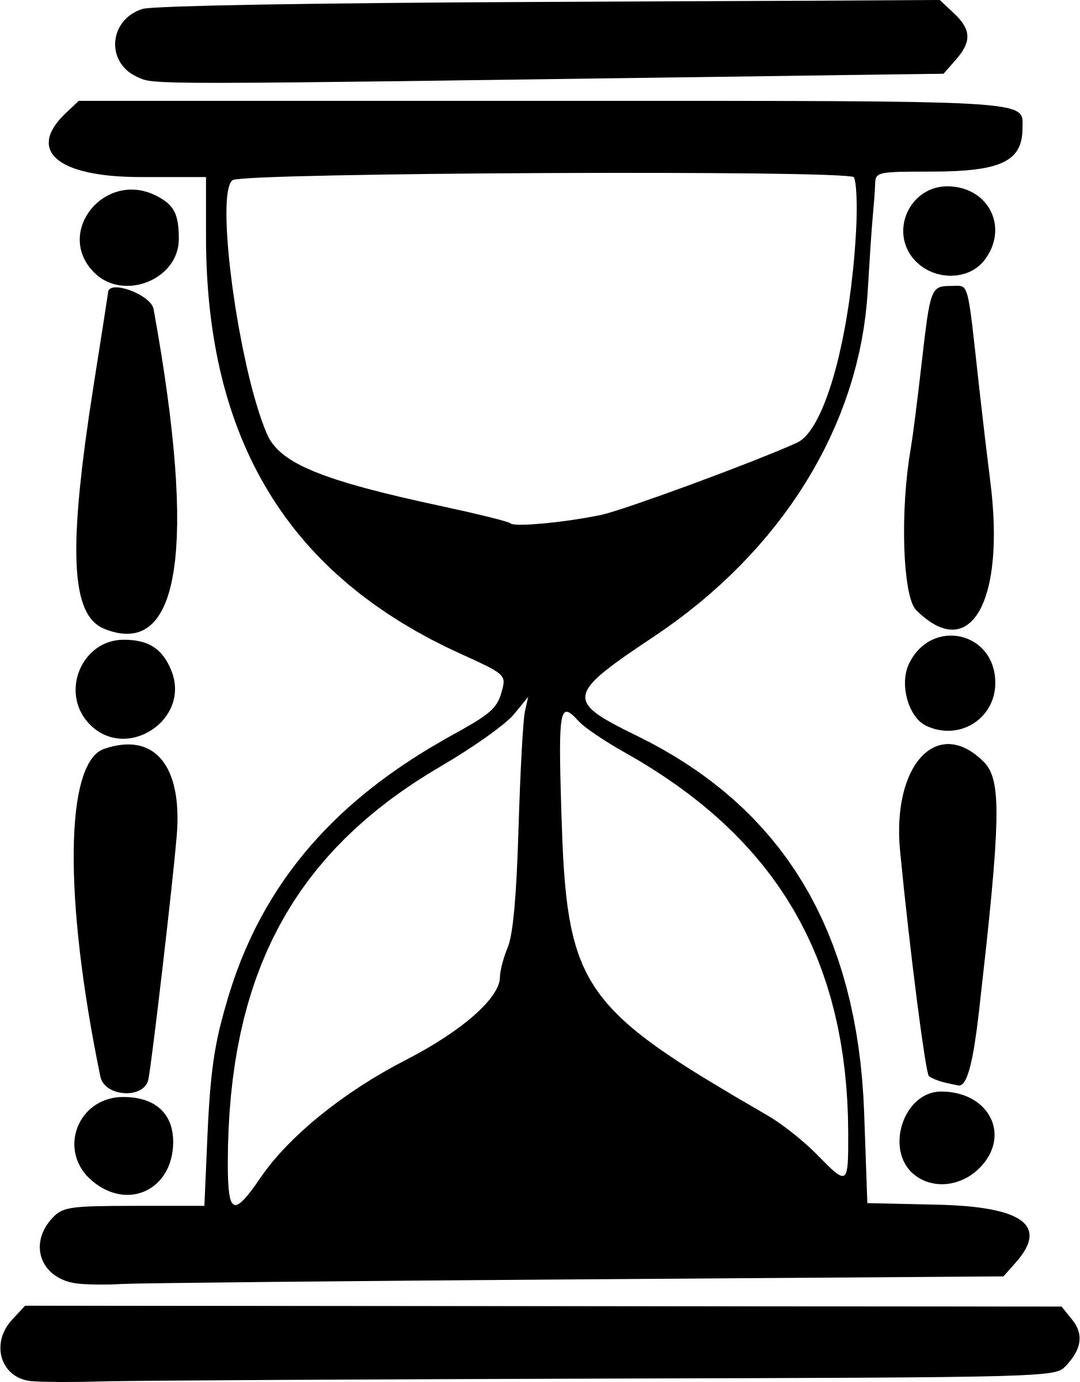 Hourglass silhouette png transparent